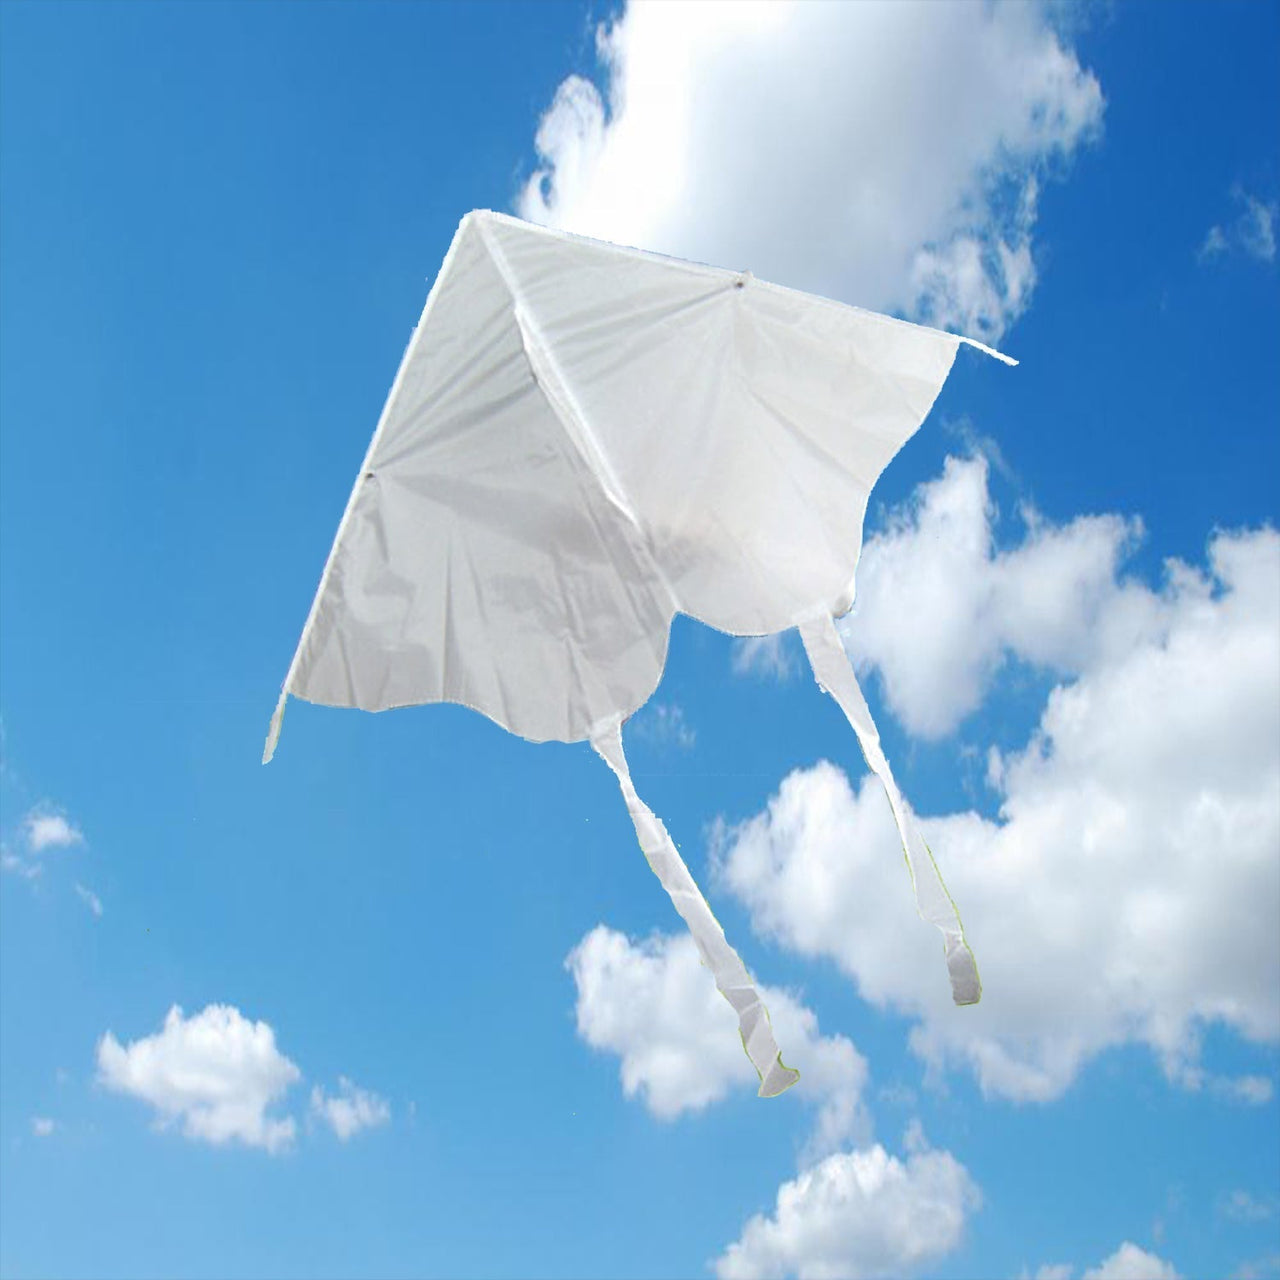 DIY Draw-it-yourself Butterfly Kite